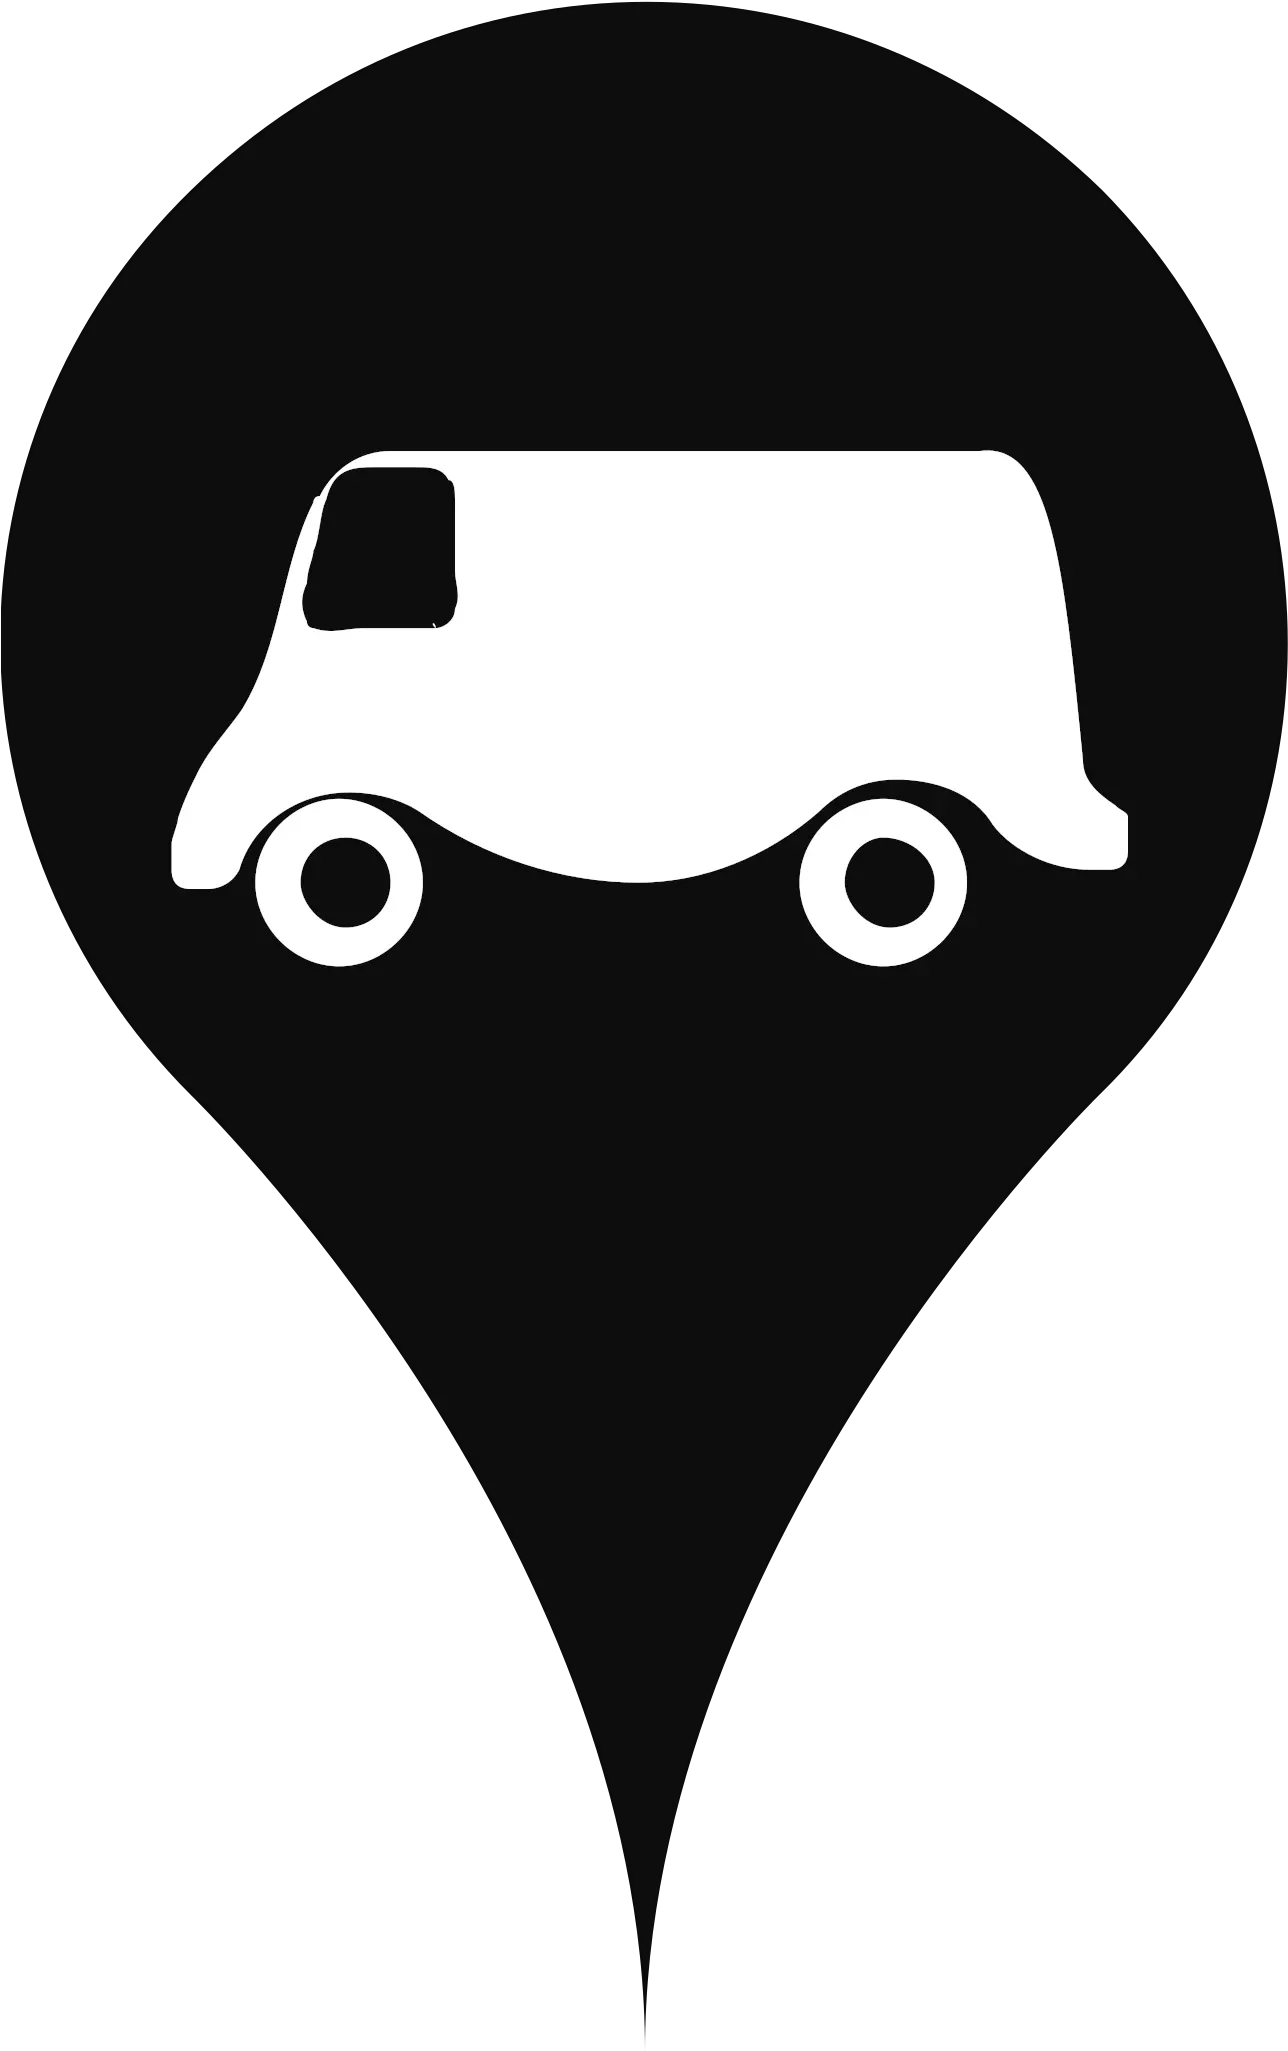 Filemap Icontrucksvg Wikimedia Commons Png Images Icon Truck Nap Icon